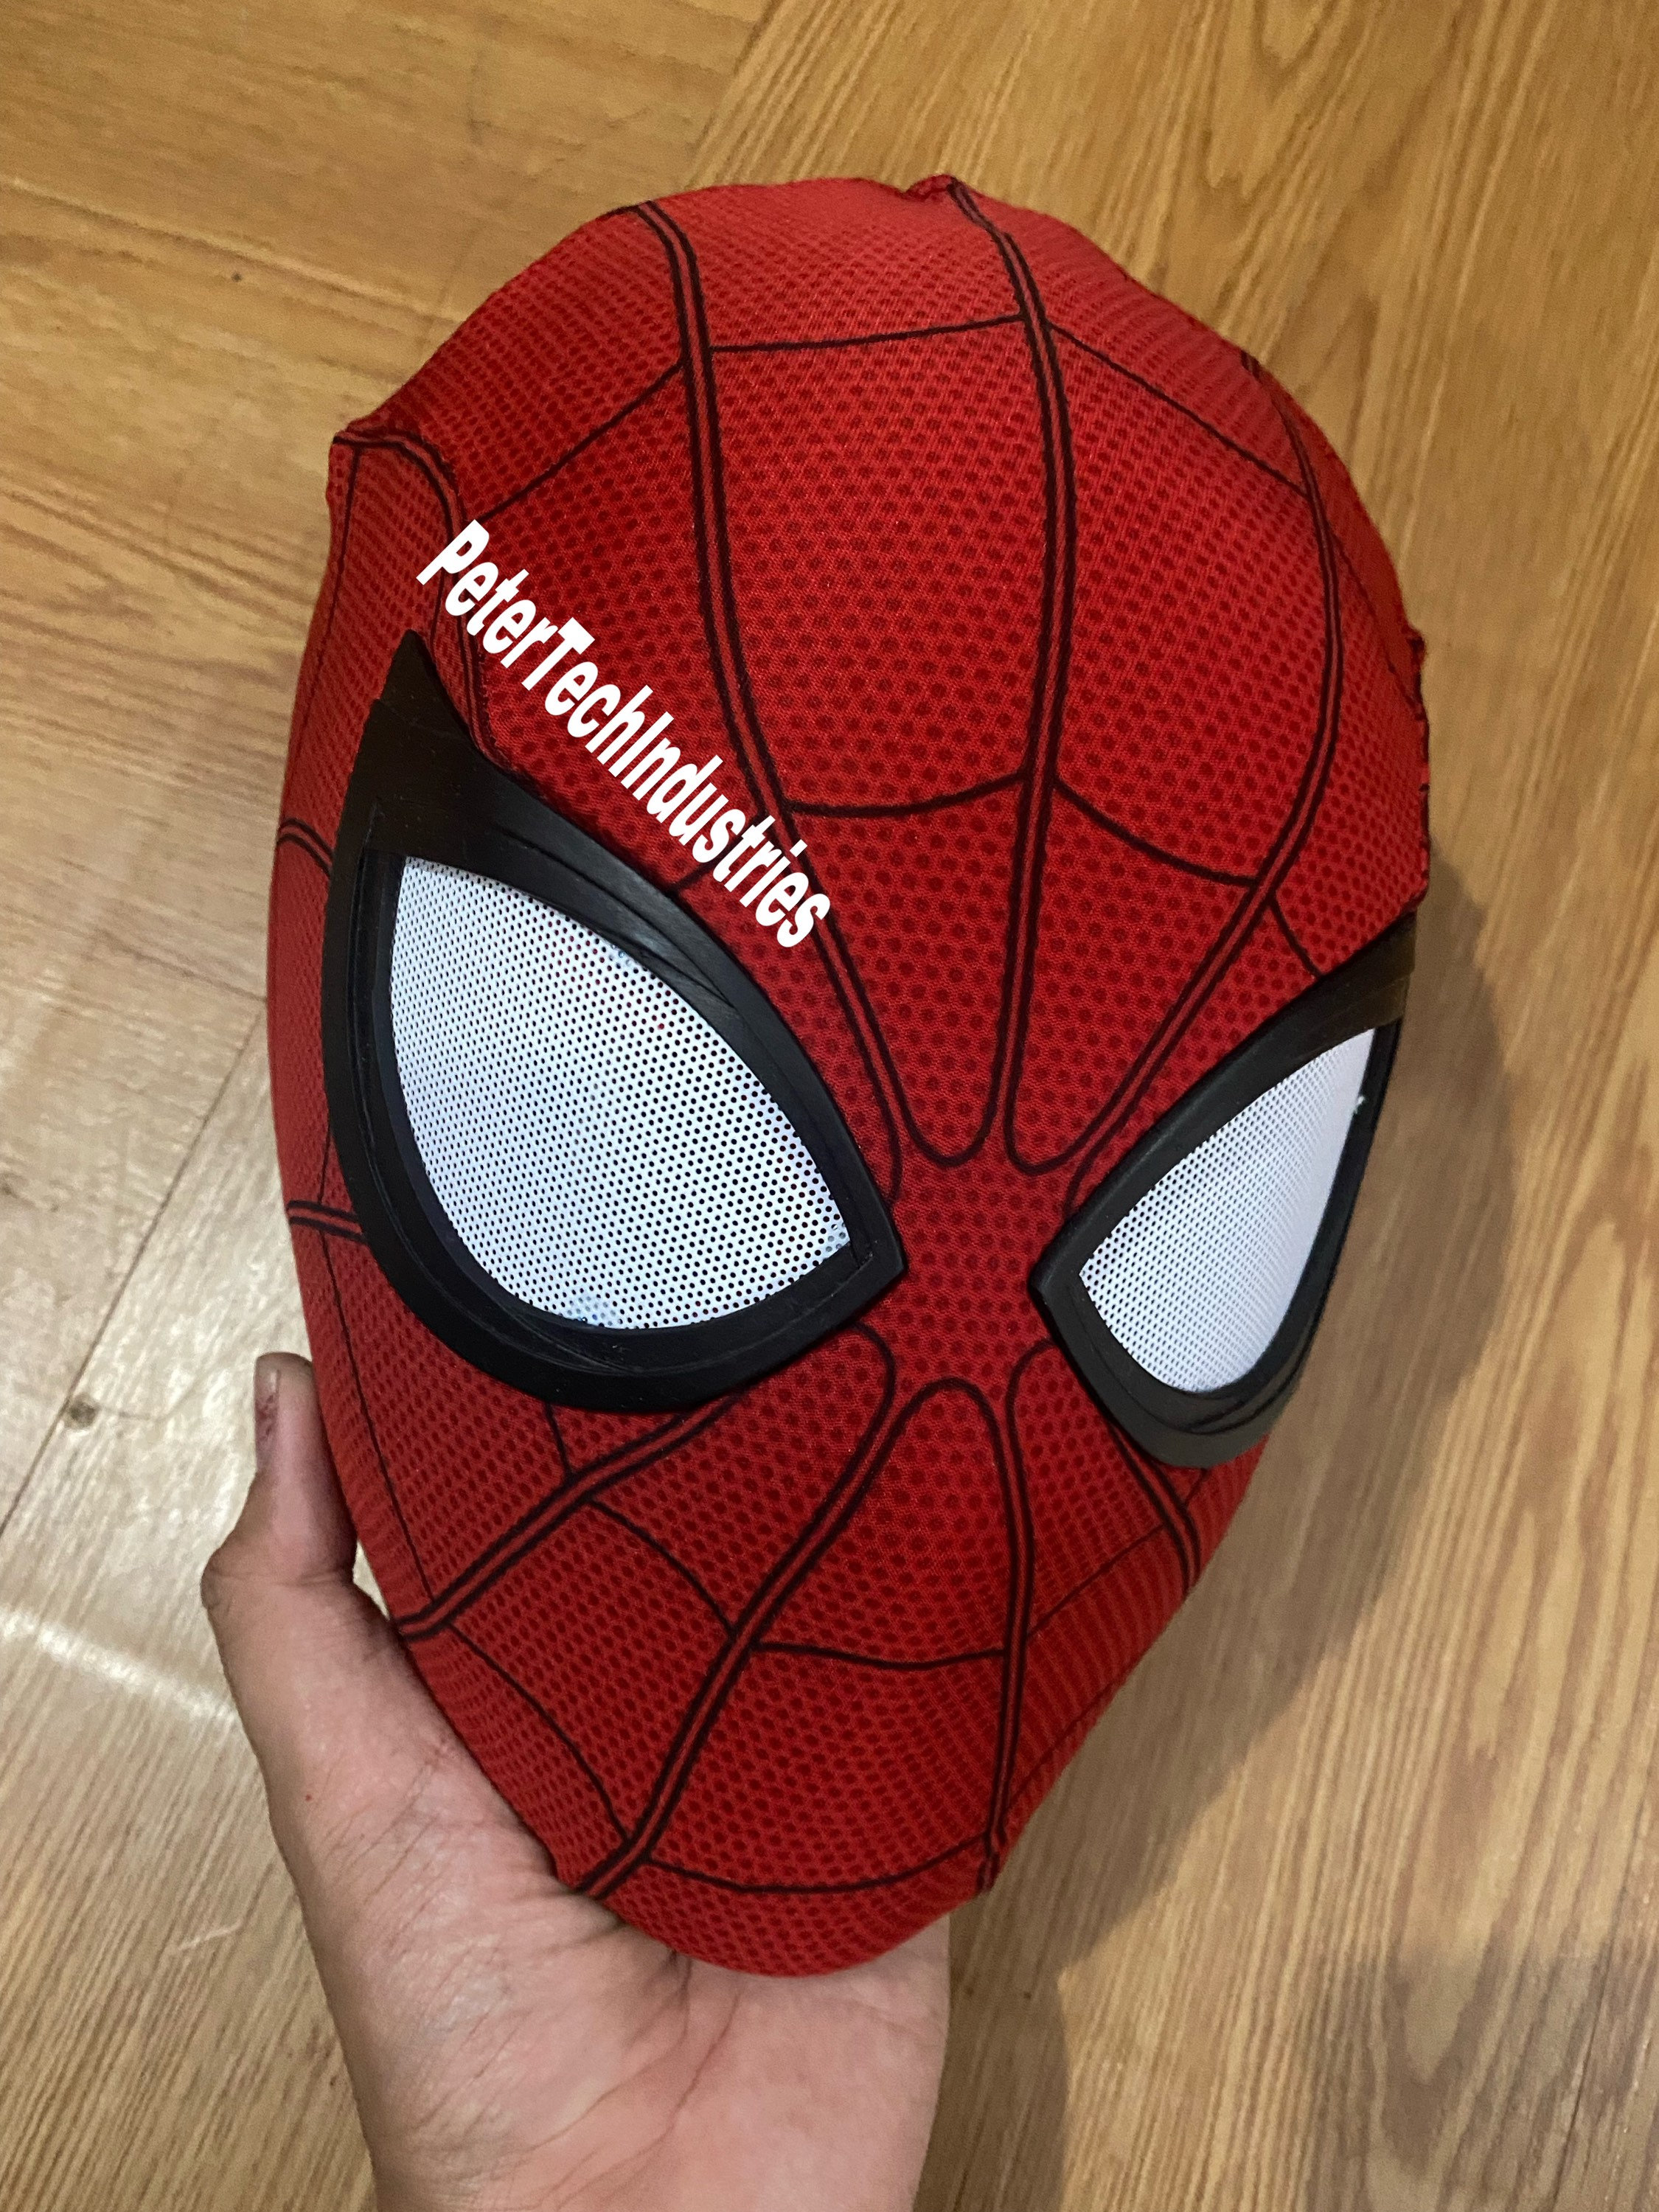 Mcu Spiderman Far From Home Faceshell Mask Spiderman Homecoming Full  Assembled Spiderman Mask Replica 